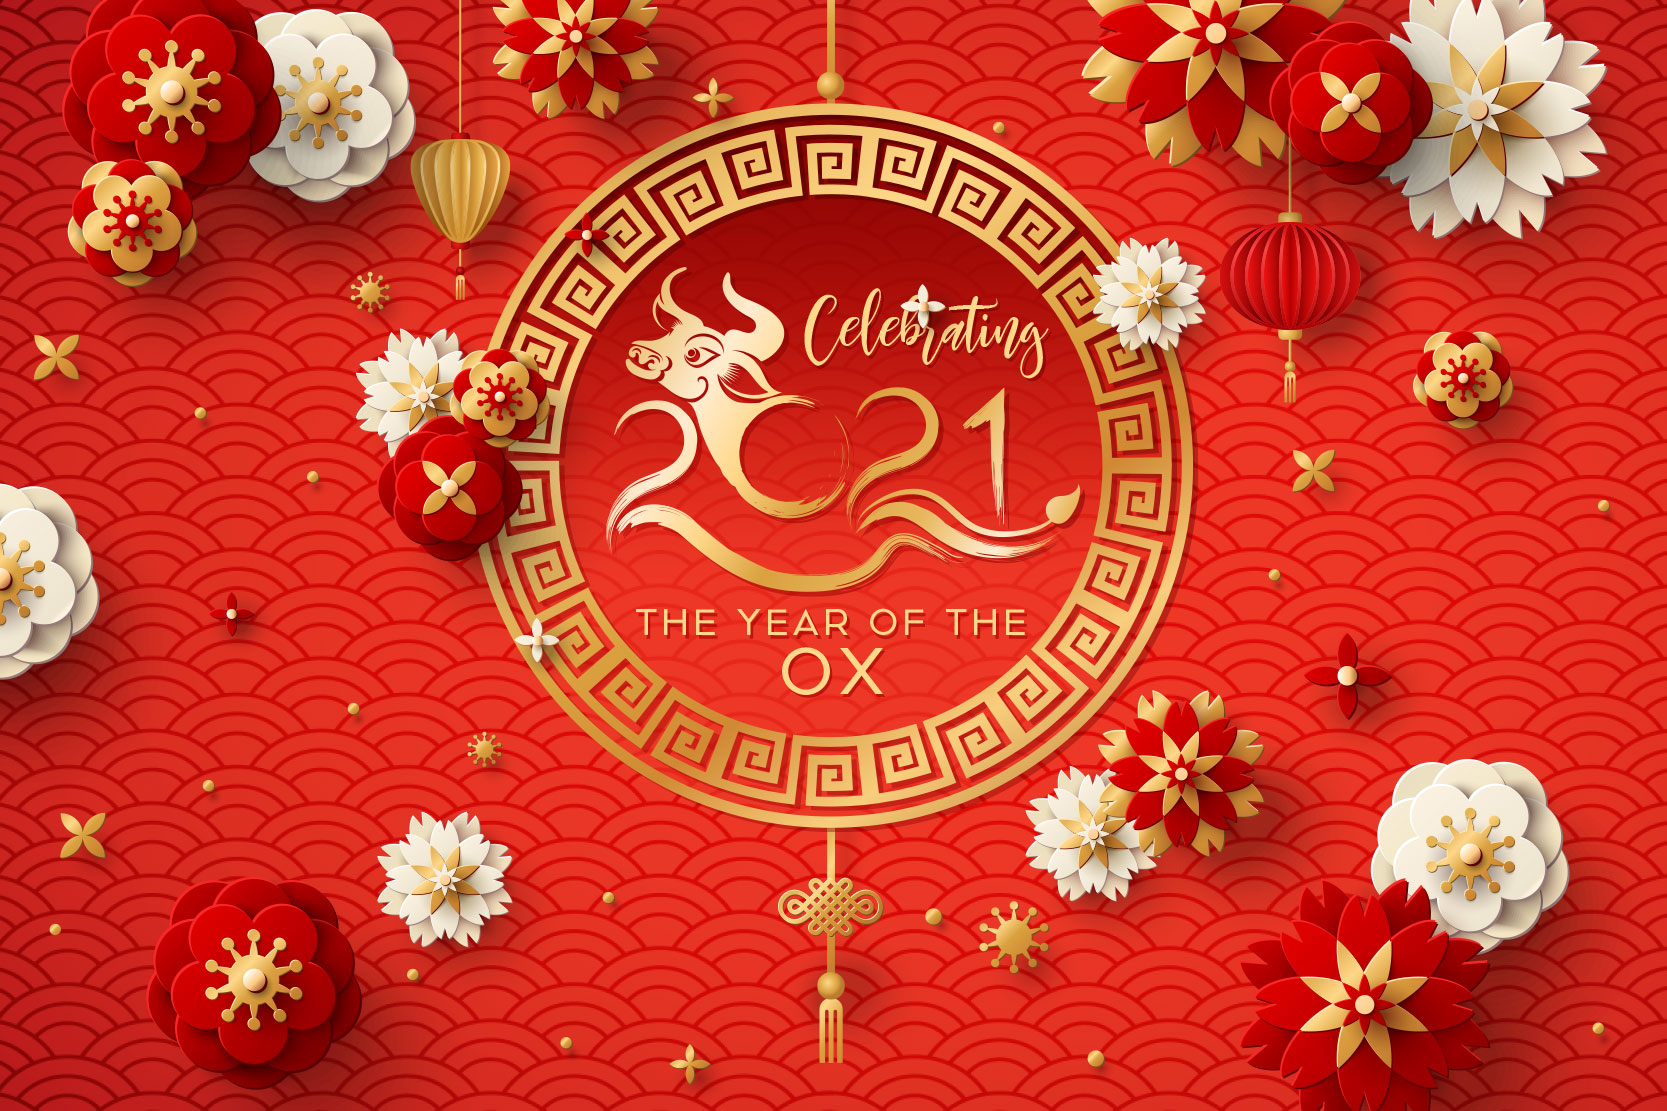 5394SBP Sunnybank Plaza LNY Whats On Web Tile 1 - LUNAR NEW YEAR 2021 - YEAR OF THE OX